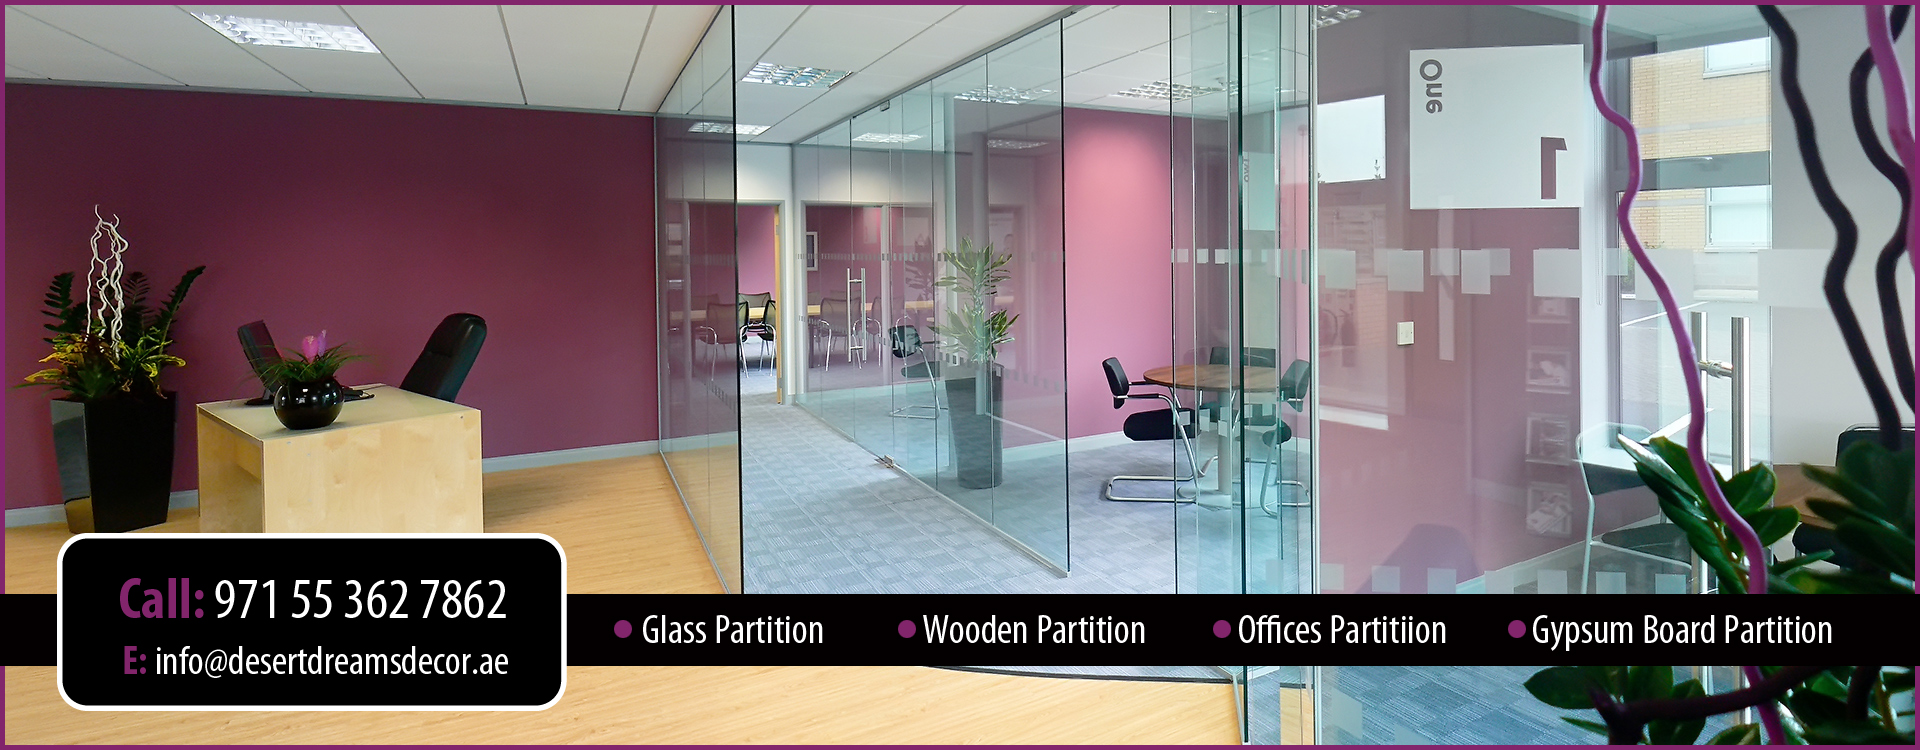 Glass Partition, Wooden Parition and Gypsum Board Partition Works in UAE.jpg